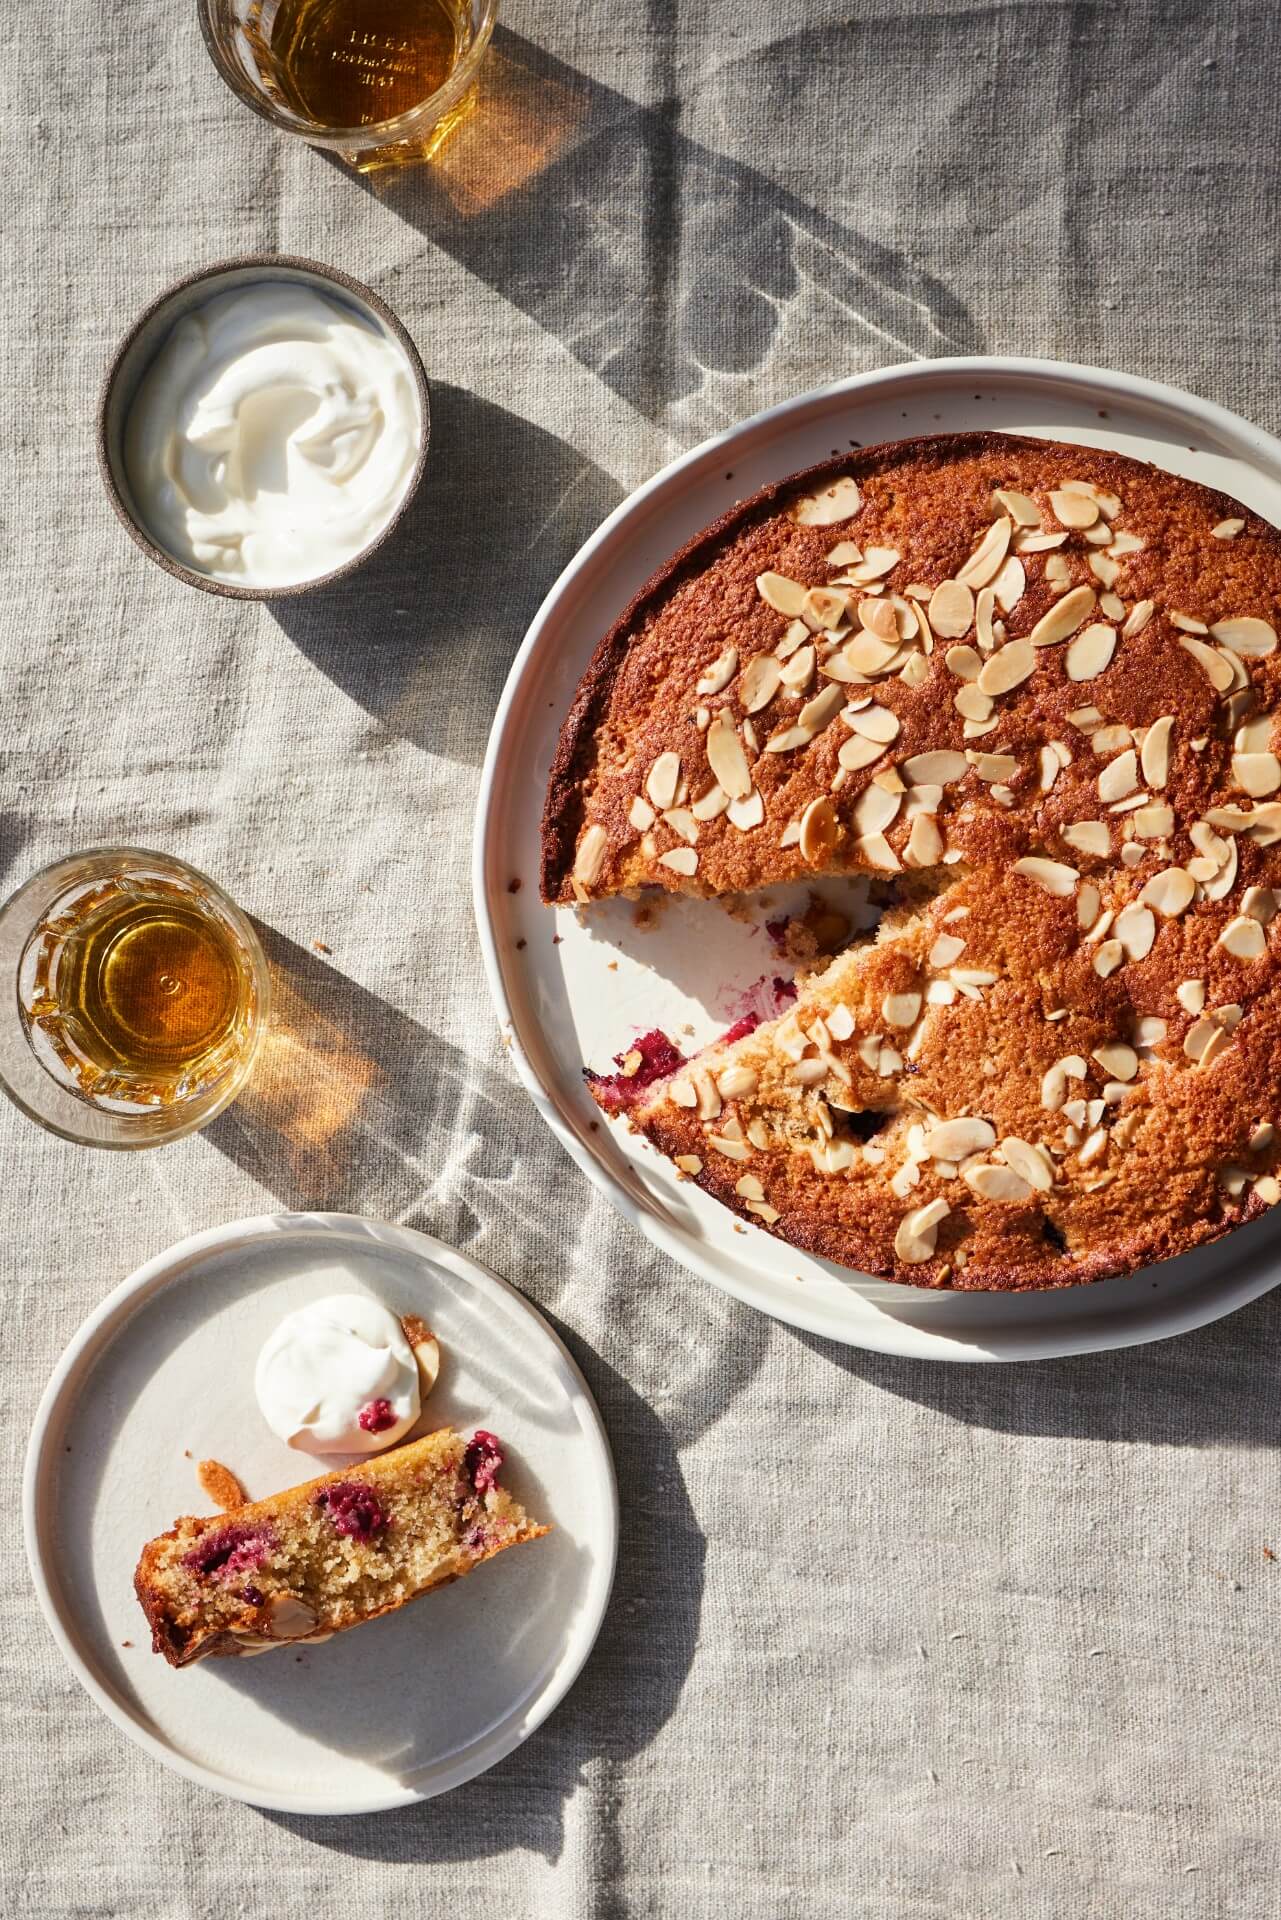 Safia Shakarchi of Another Pantry's blackberry, almond and cardamom cake recipe